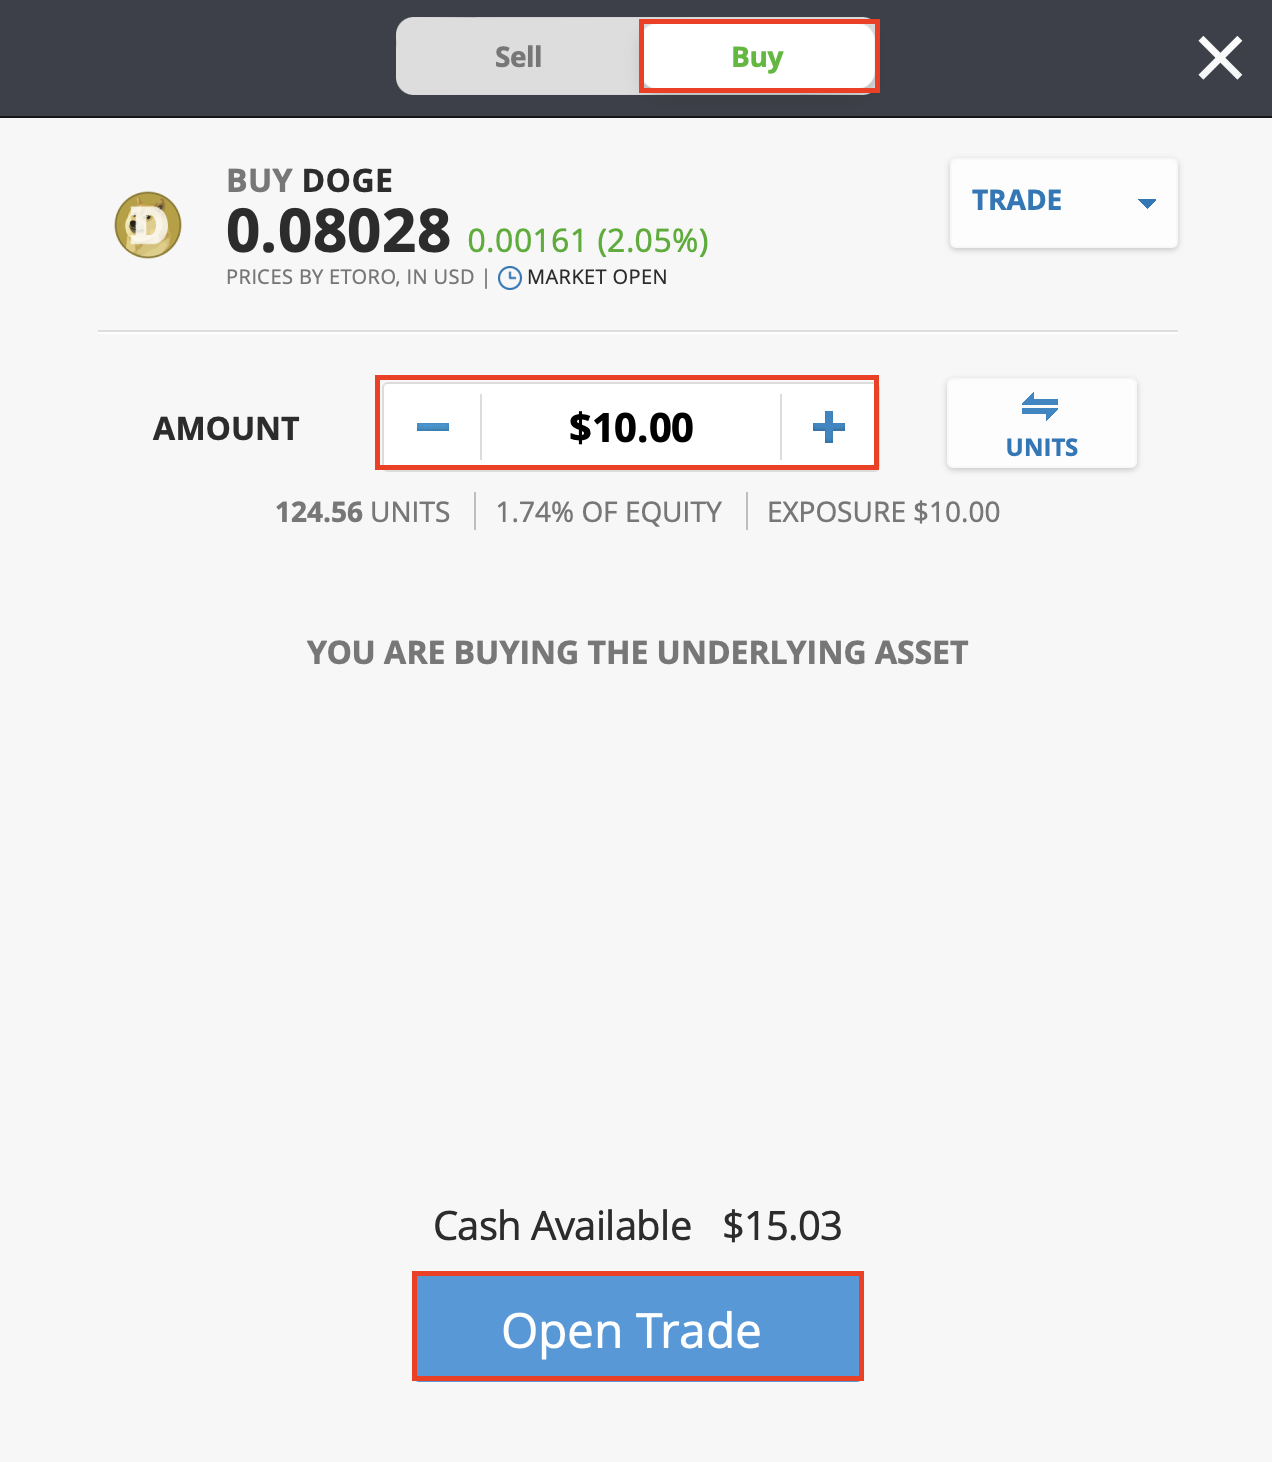 Step 2. Complete the transaction by pressing the “Open Trade” button  